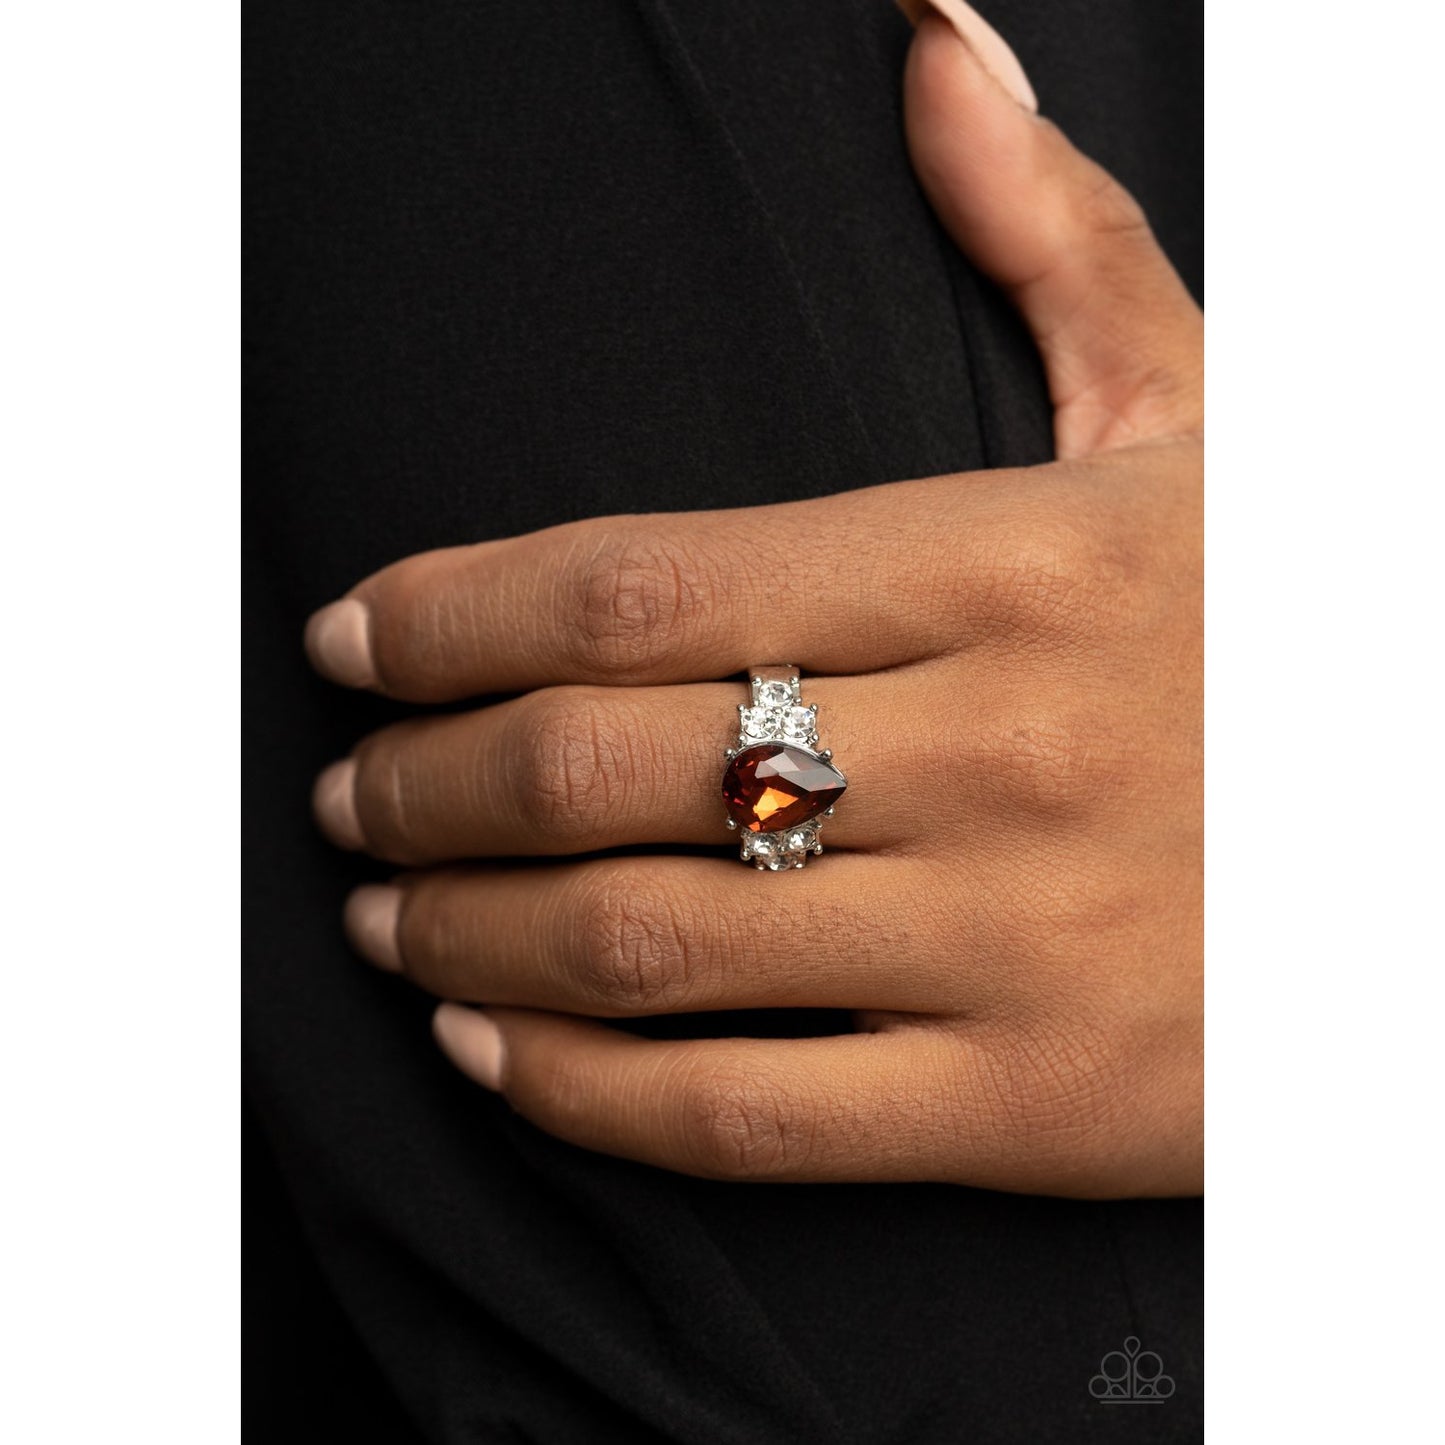 Happily Ever Eloquent - Brown Rhinestone Ring - Paparazzi Accessories - GlaMarous Titi Jewels